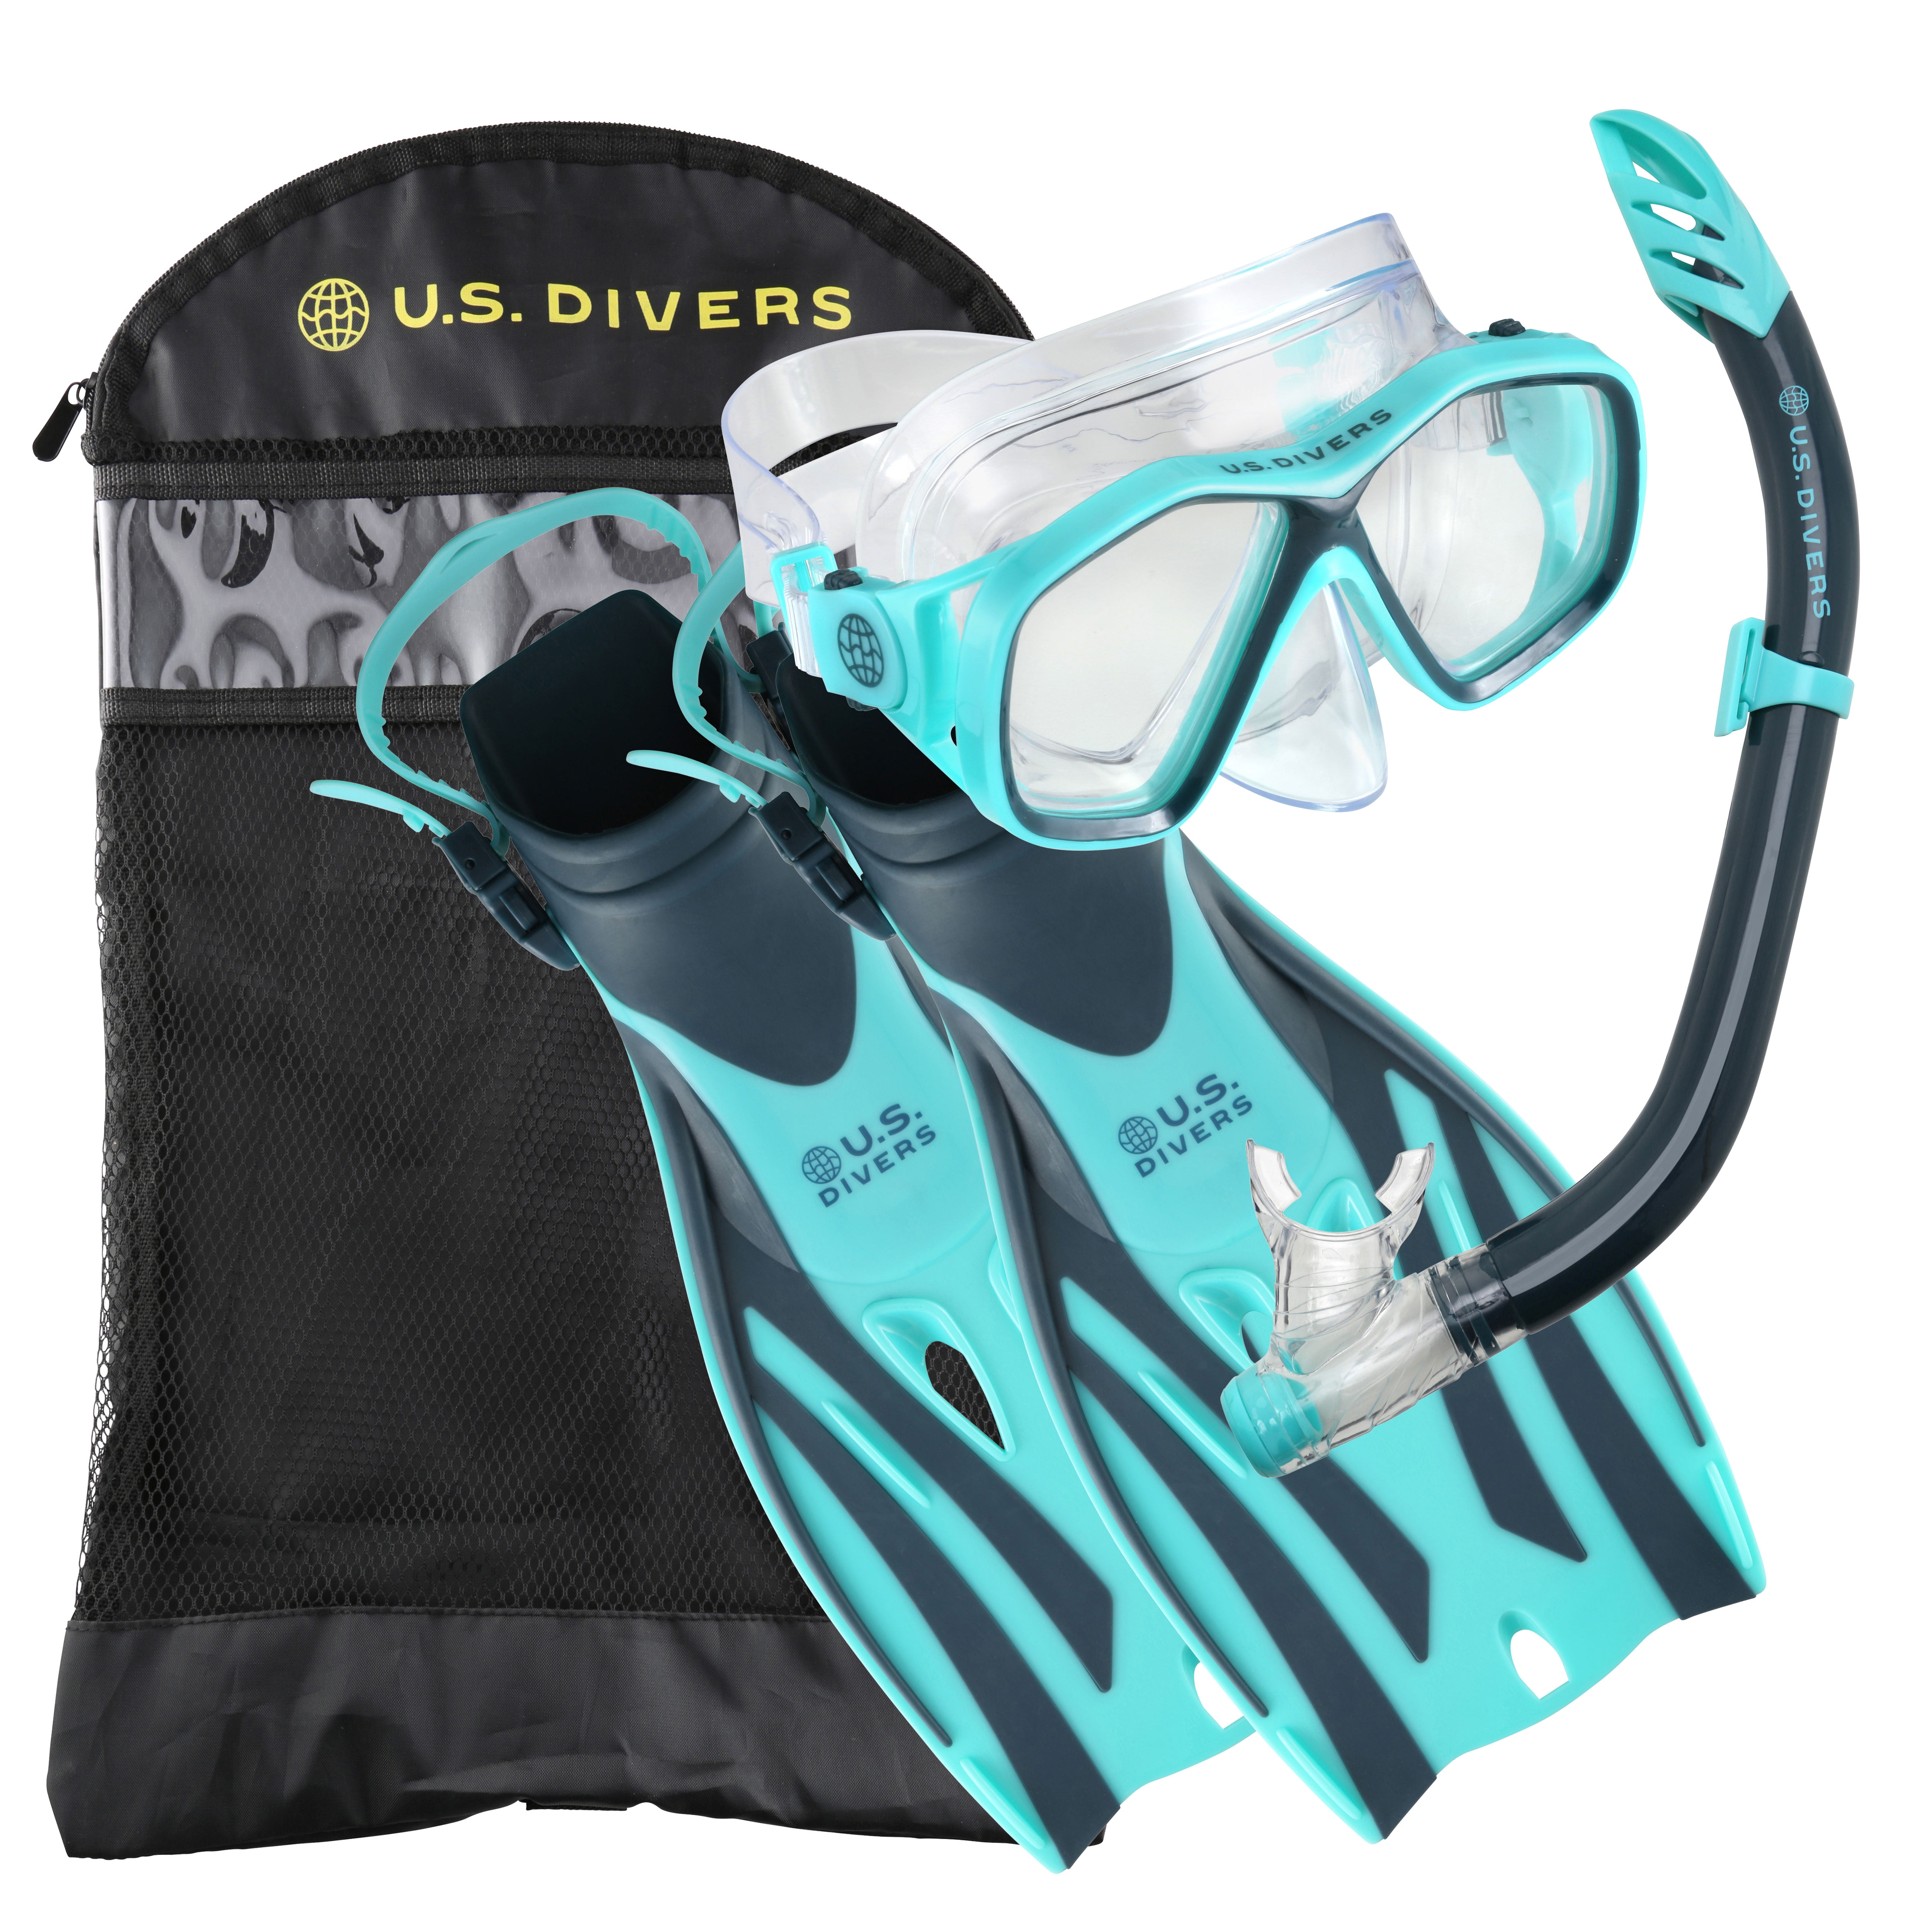 Divers 256990 Adult Cozumel Mask with Fins and Gearbag for sale online U.S 